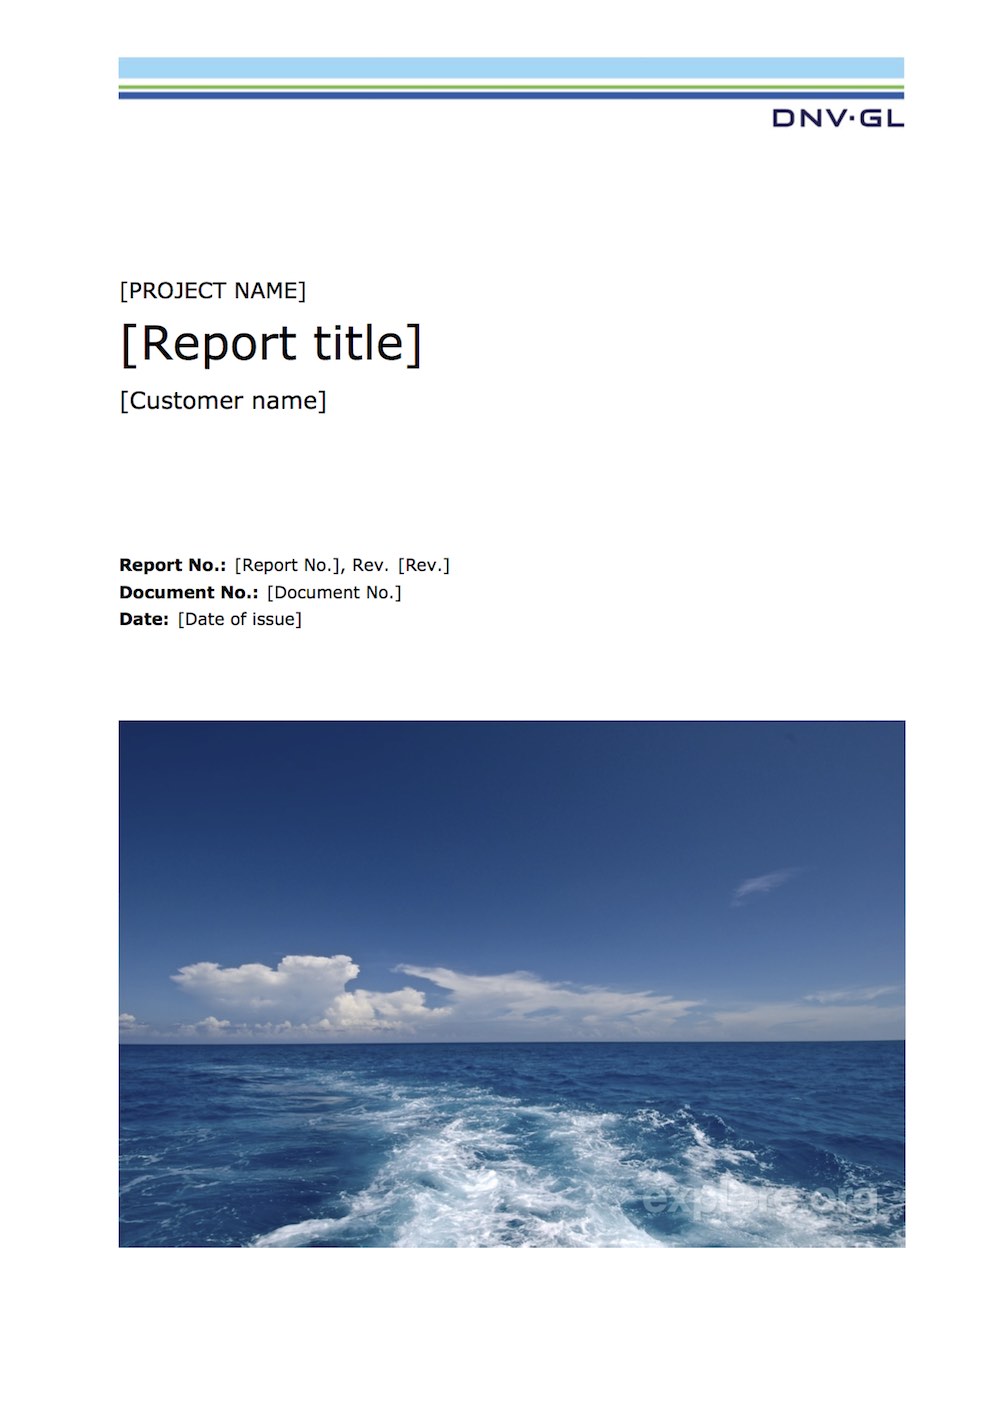 LaTeX Typesetting - Showcase of Previous Work With Regard To Latex Project Report Template